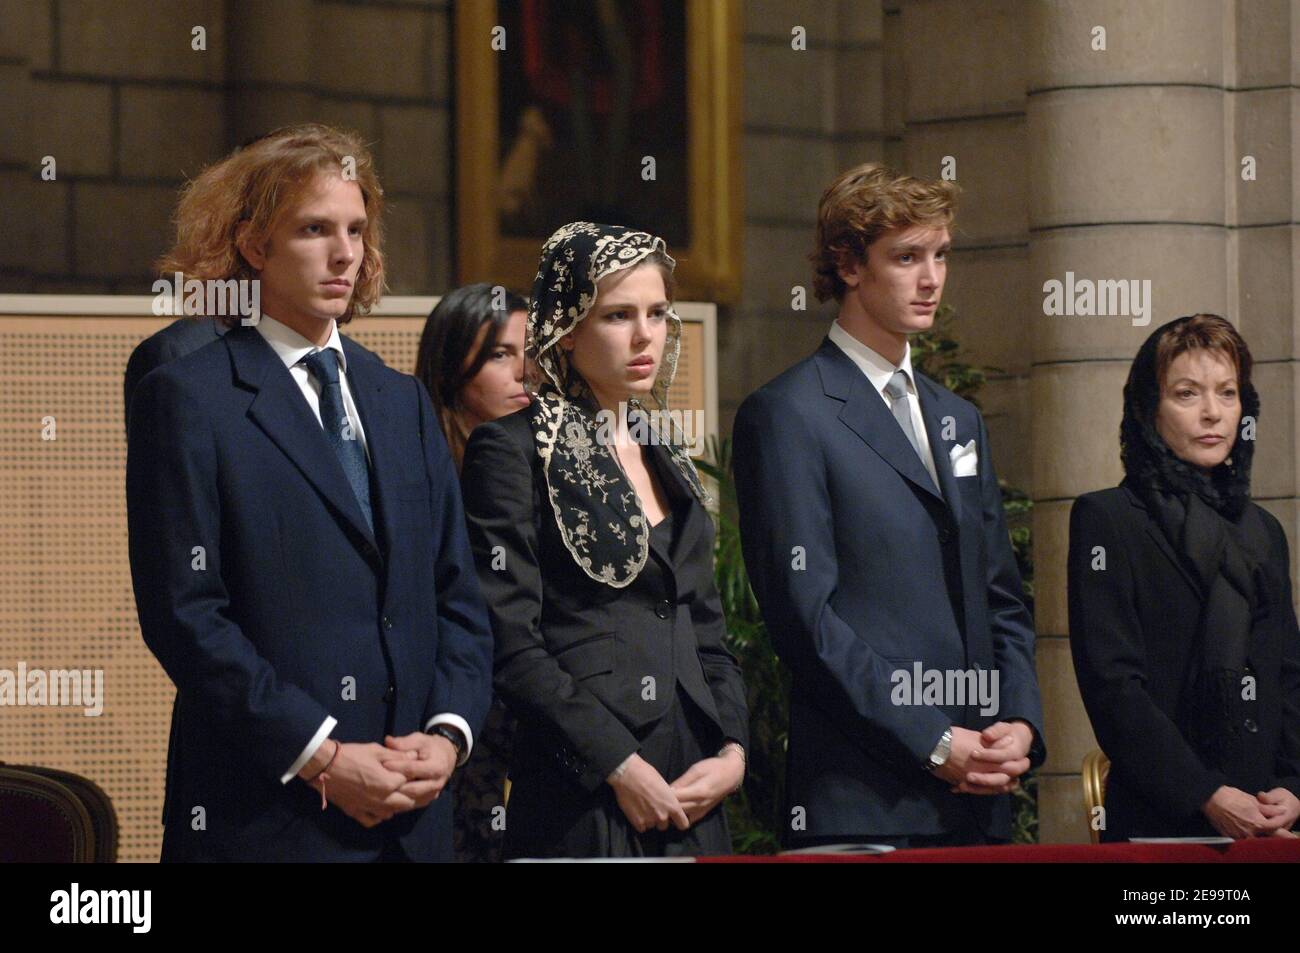 Andrea, Charlotte, Pierre Casiraghi and Countess Alizabeth-Ann de Massy attend the mass commemorating the first anniversary of Prince Rainier's death in Saint-Nicolas Cathedral, in Monaco on April 6, 2006. Prince Rainier III died on April 6, 2005 after a serious illness, and his only son Prince Albert, succeeded him. Photo by Pool/ABACAPRESS.COM Stock Photo